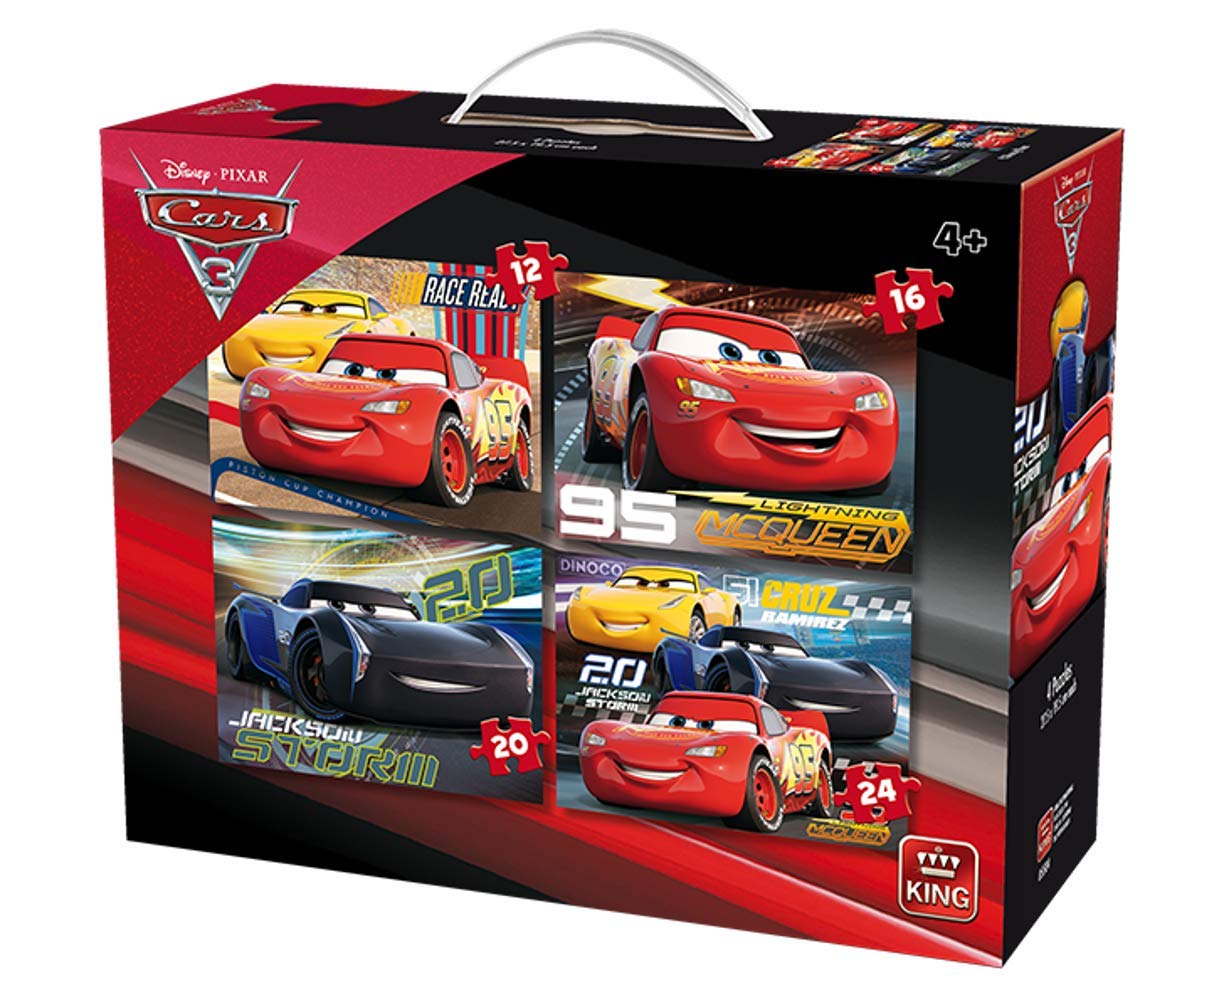 King Disney Puzzle 4 In 1 Cars 5504 3, 12, 16, 20 And 24 Pcs